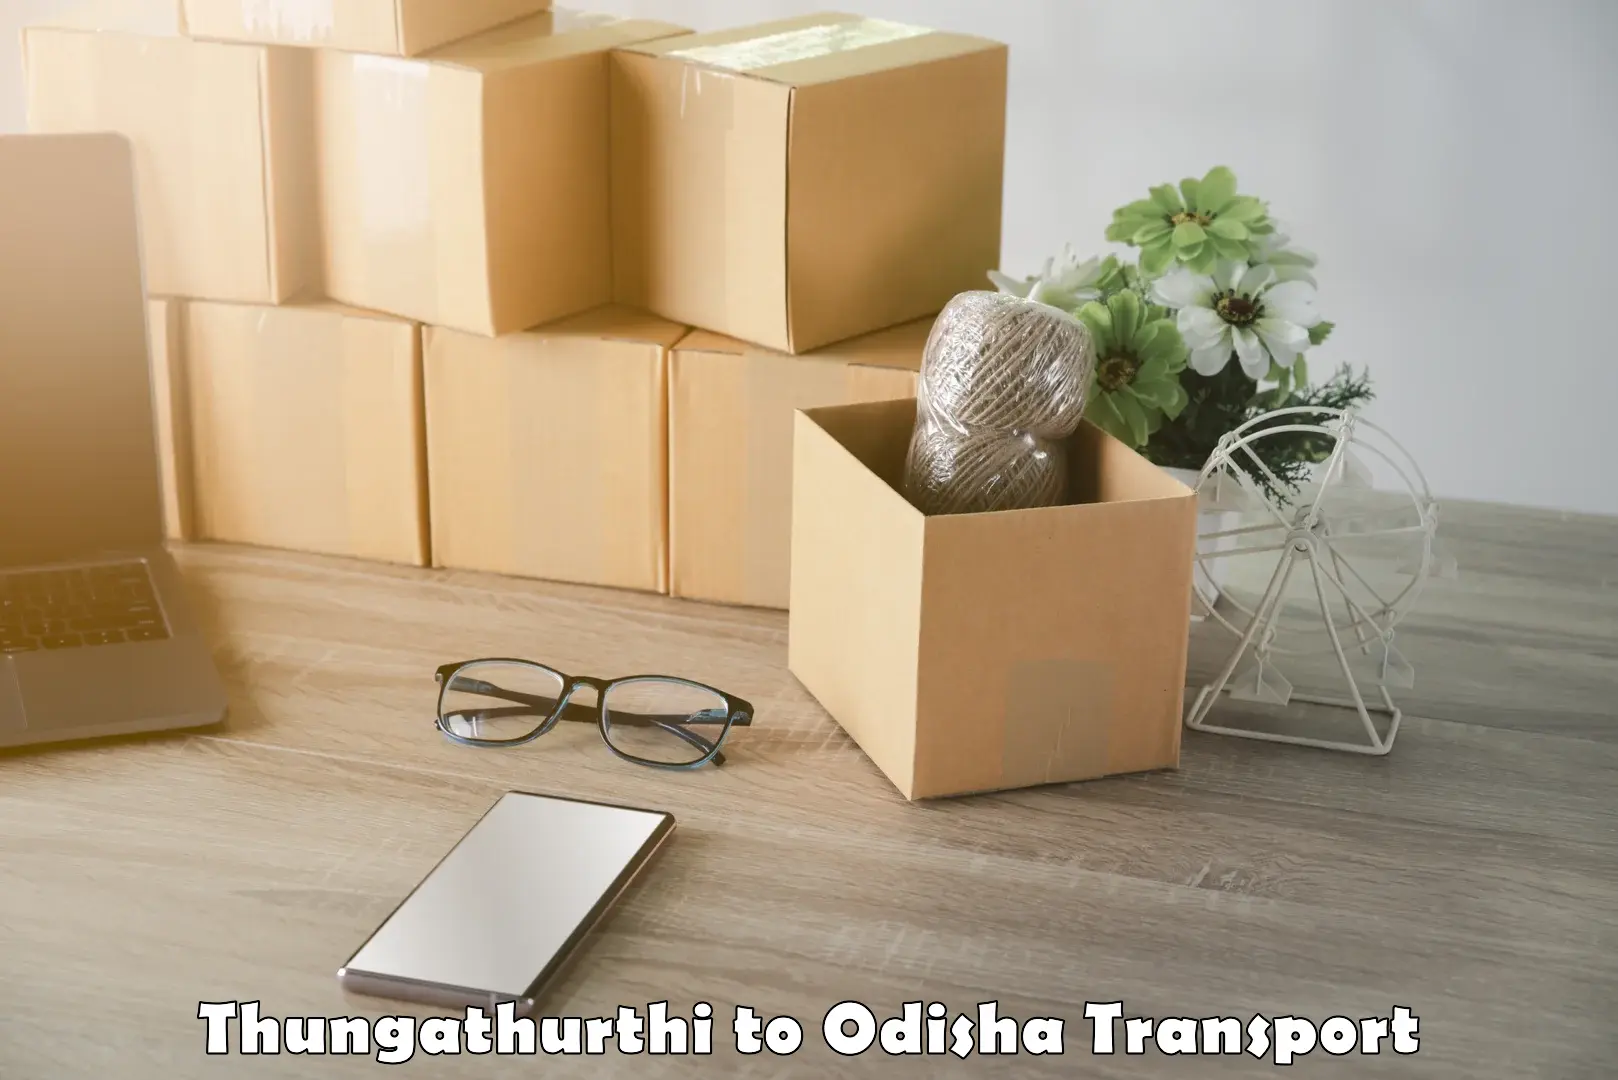 Online transport service in Thungathurthi to Asika